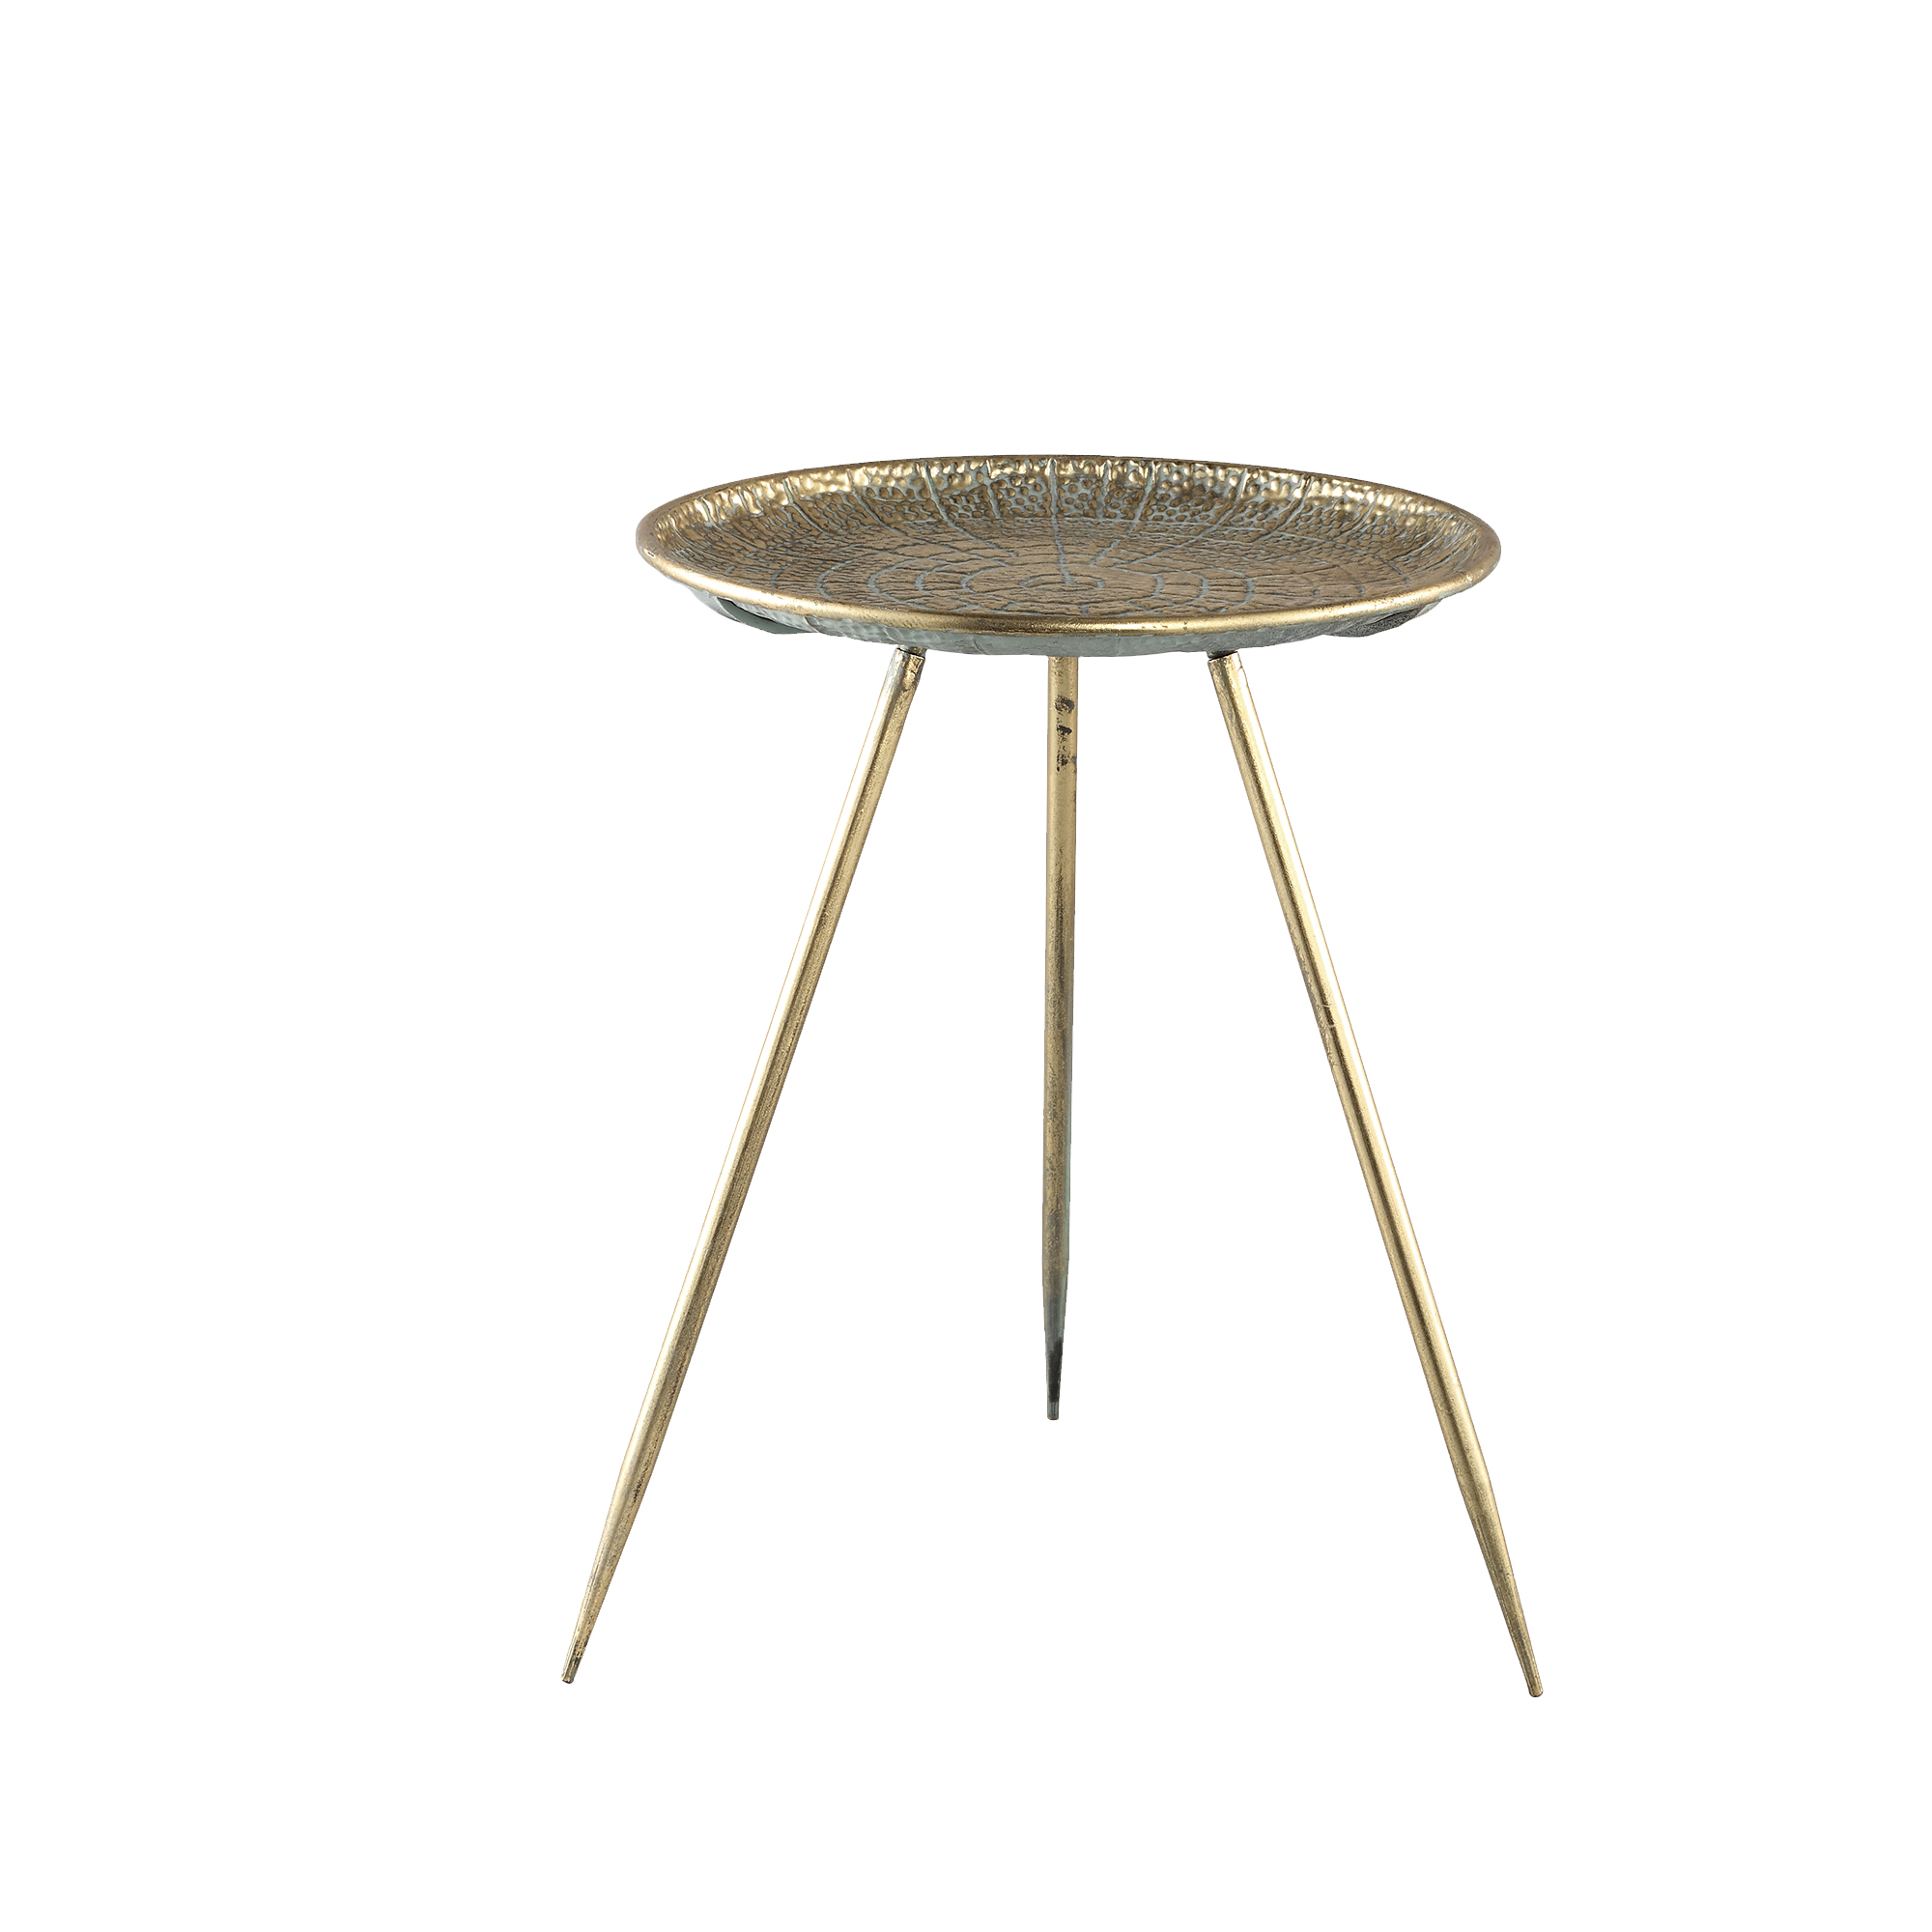 Ronan Gold metal side table round with three legs